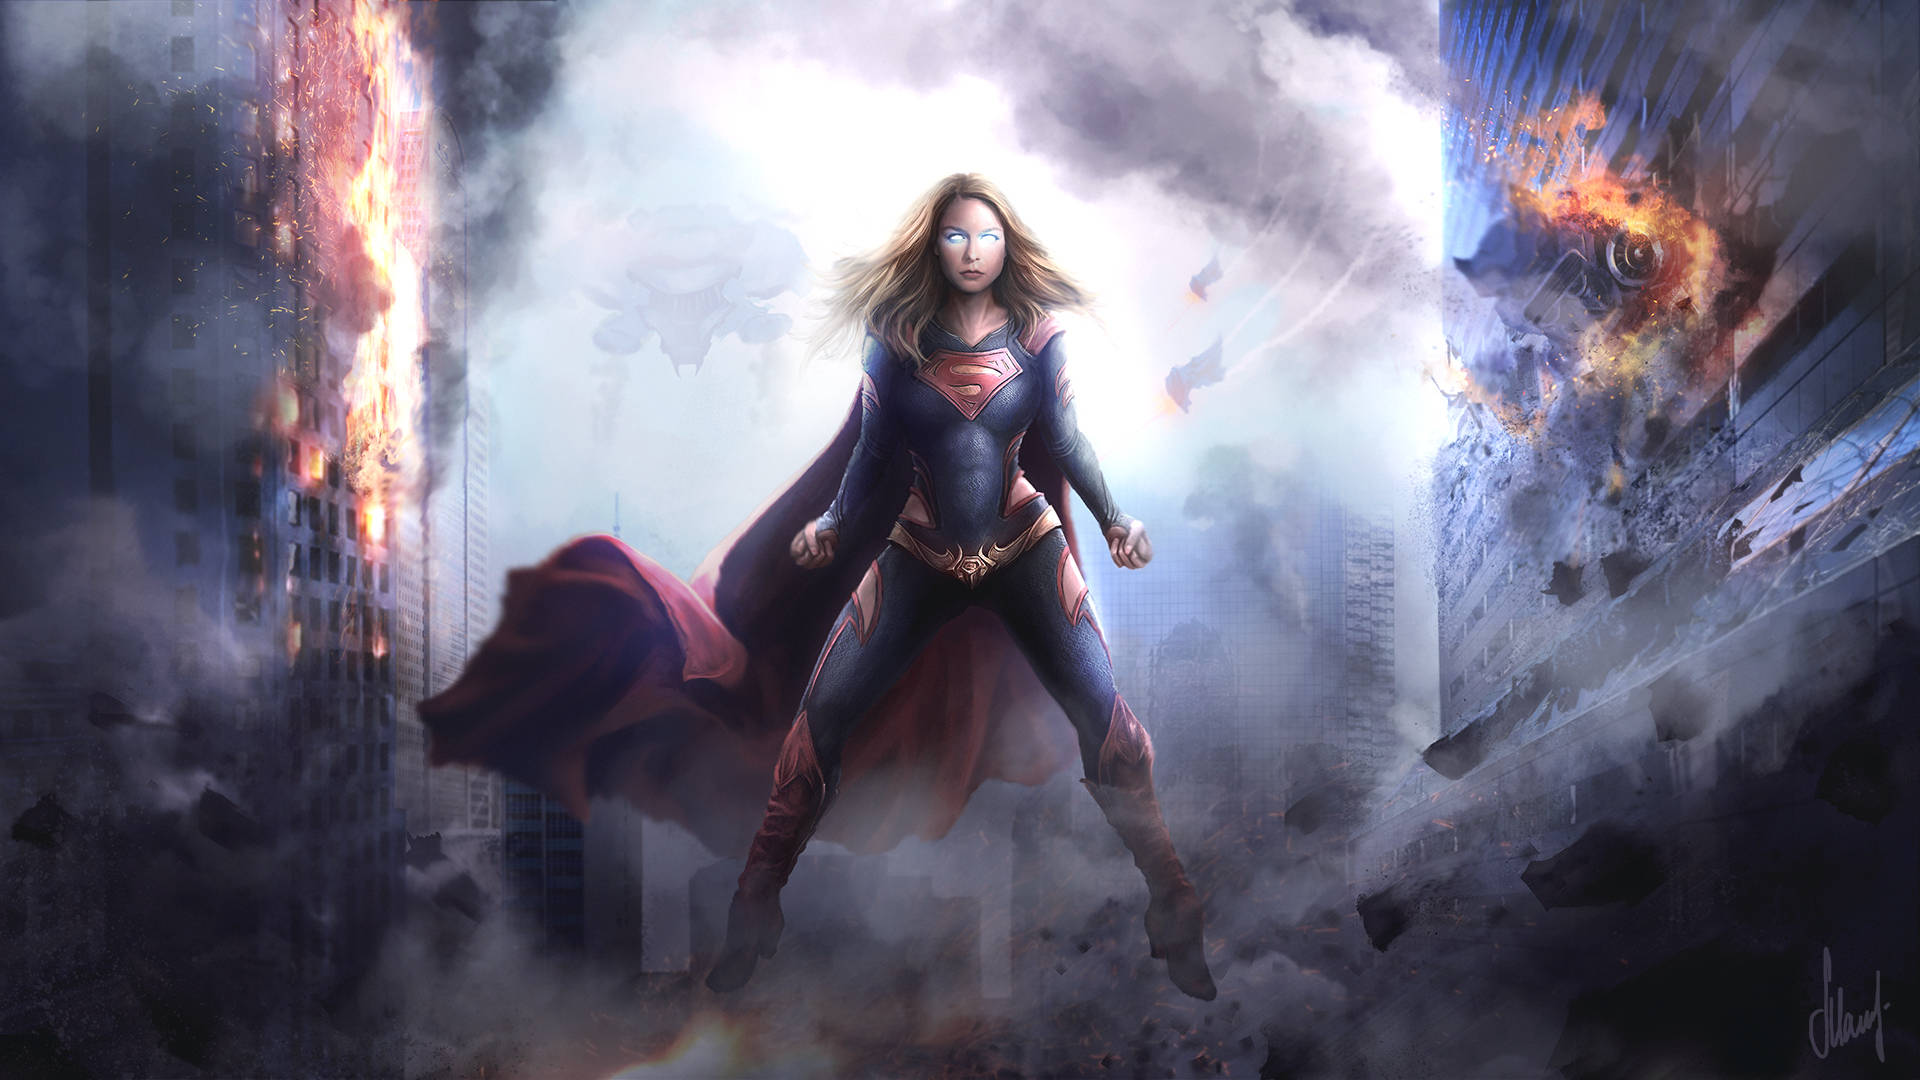 Supergirl In Apocalyptic City Wallpaper